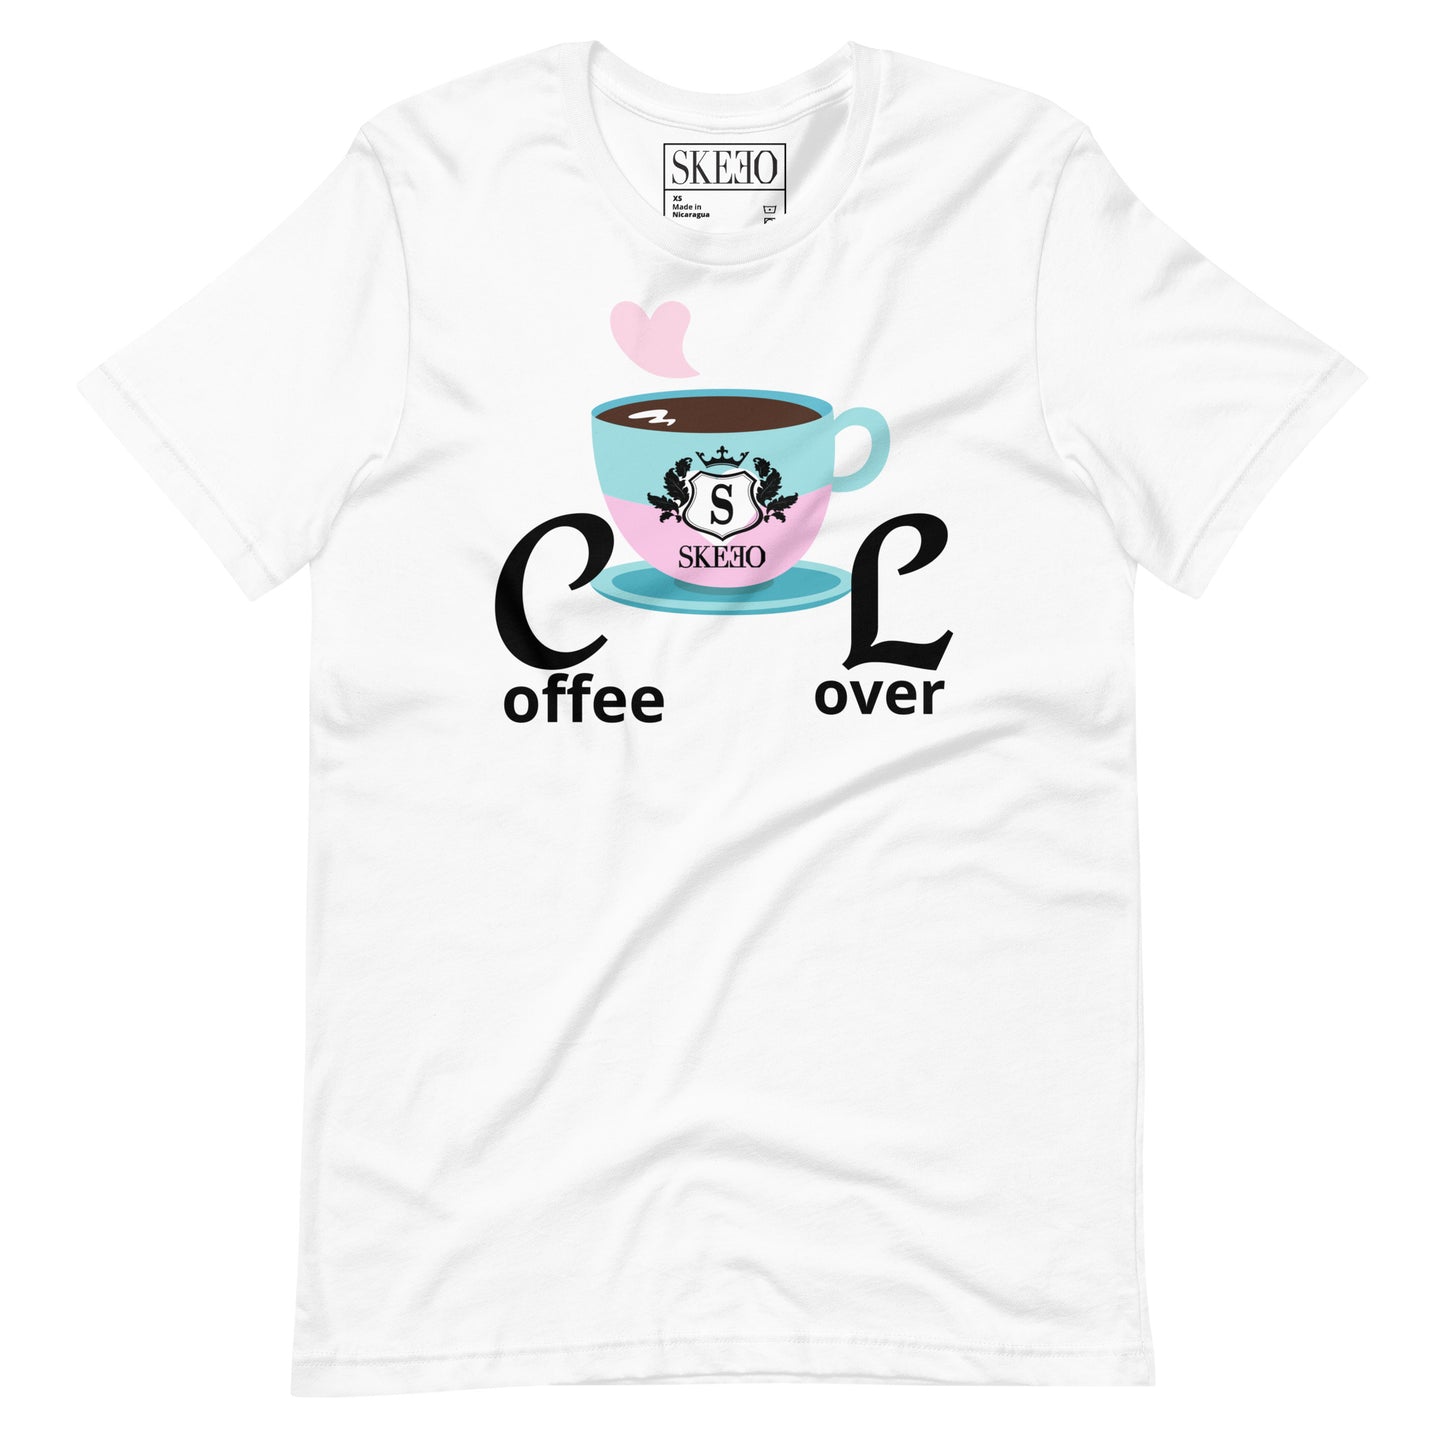 A ASK Coffee t-shirt